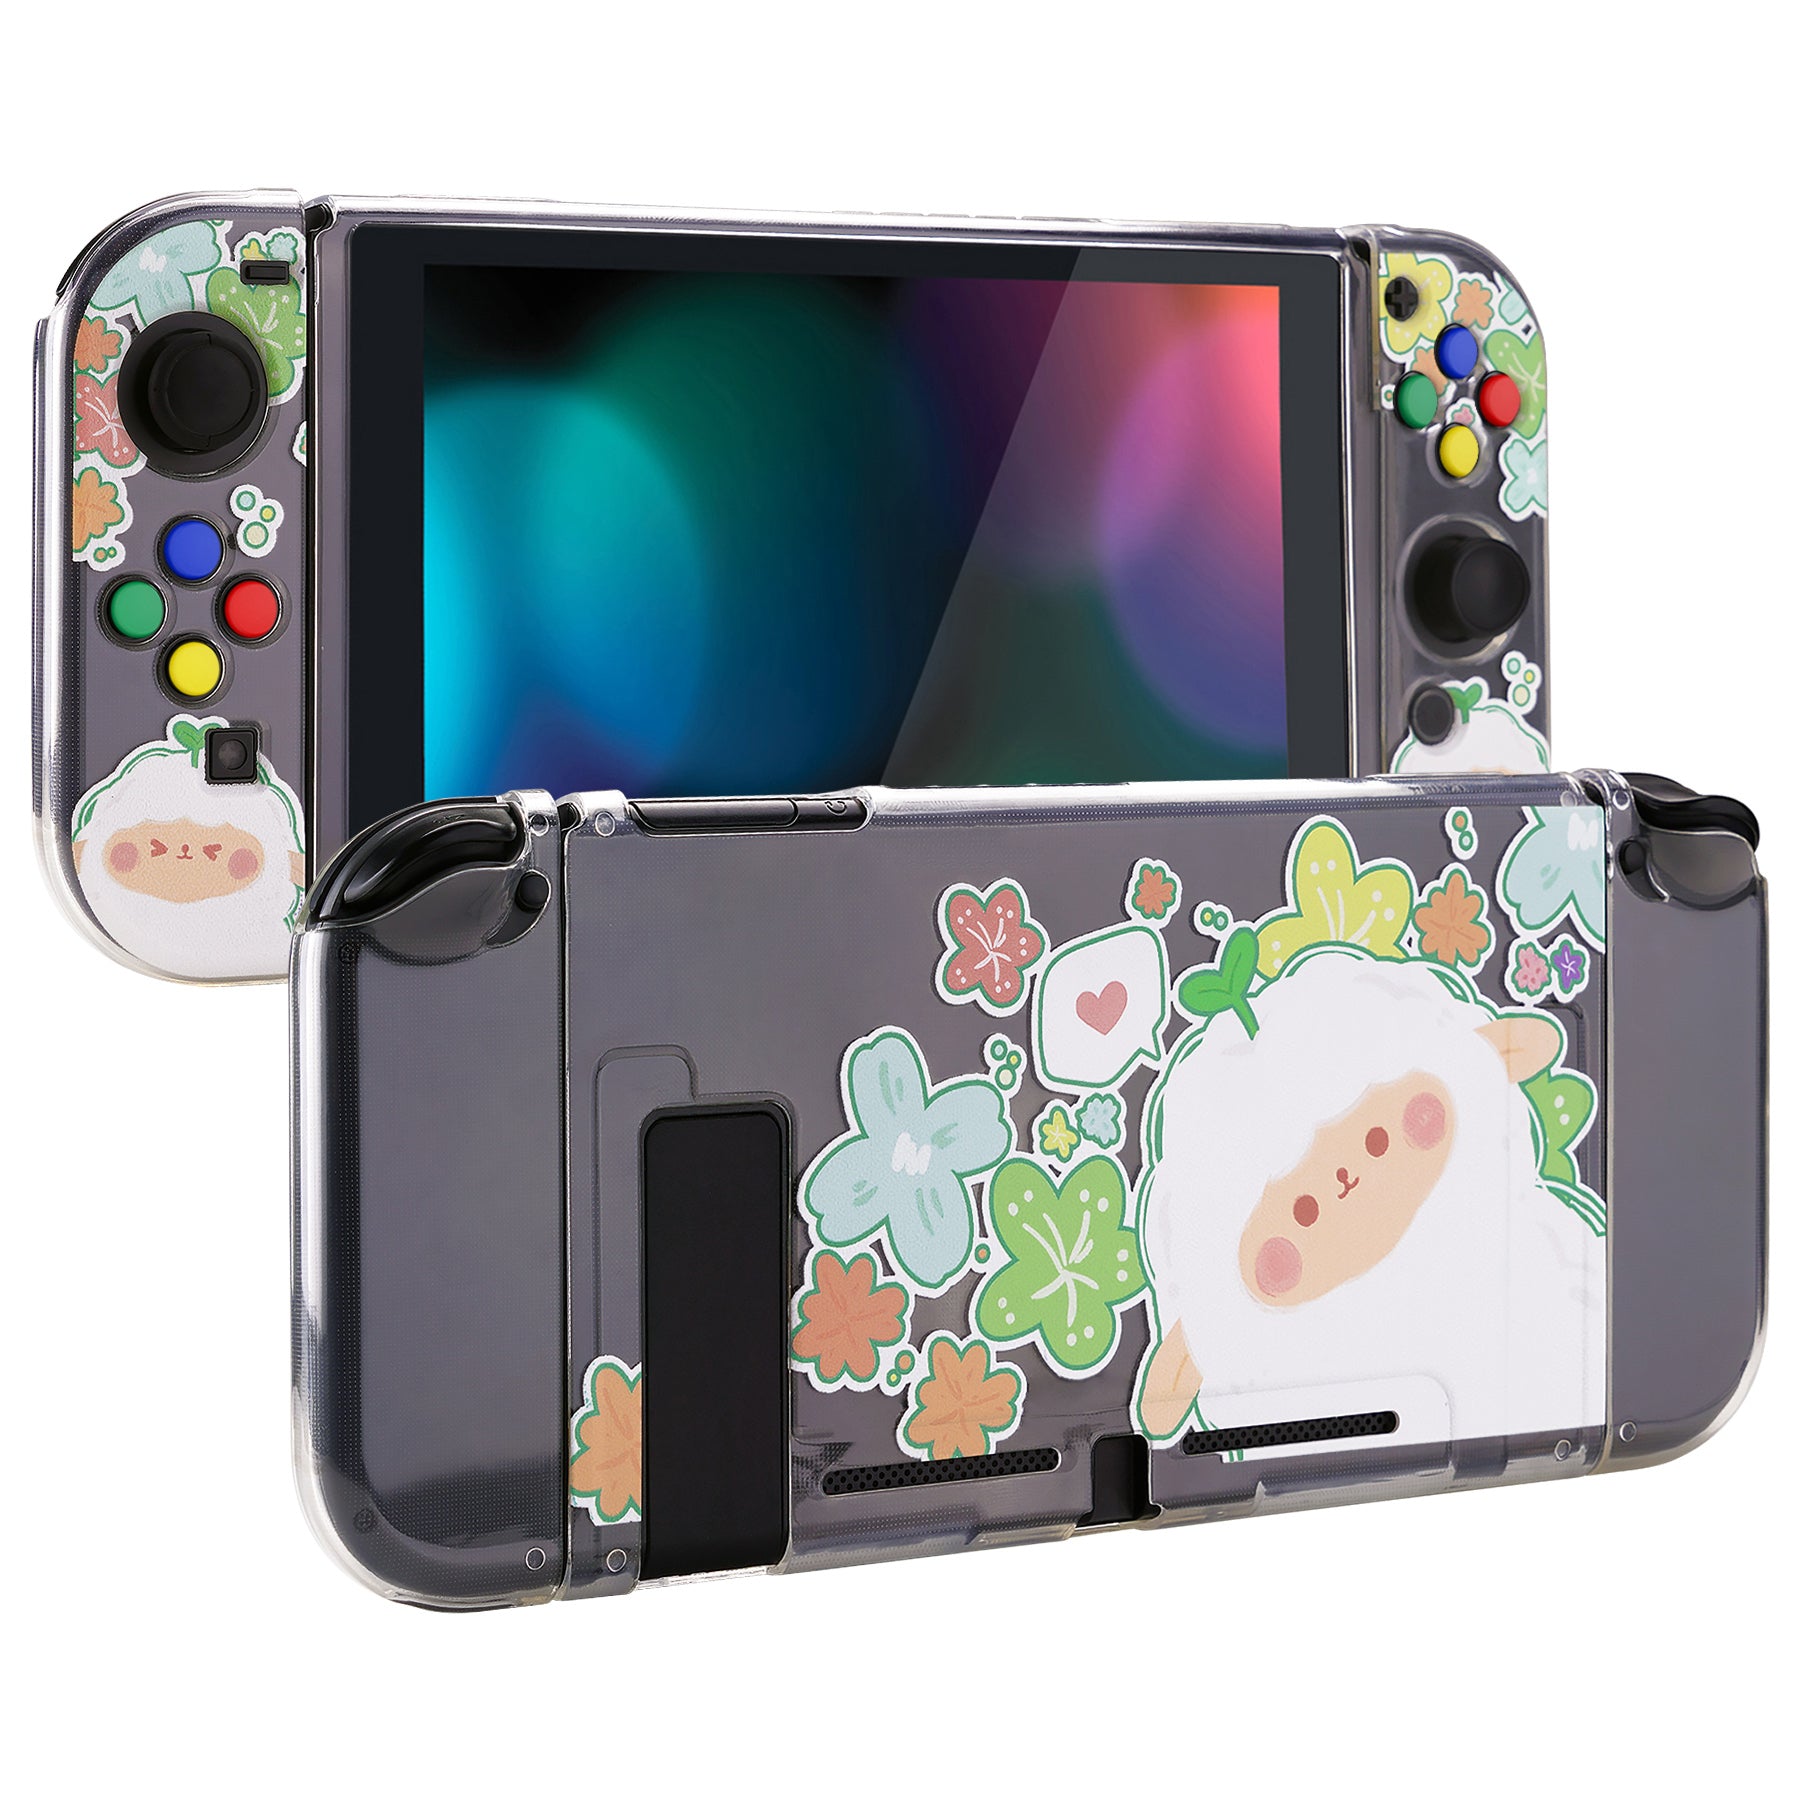 PlayVital Protective Case for Nintendo Switch, Soft TPU Slim Case Cover for Nintendo Switch Joycon Console with Colorful ABXY Direction Button Caps - Flowery Sheep - NTU6028 PlayVital